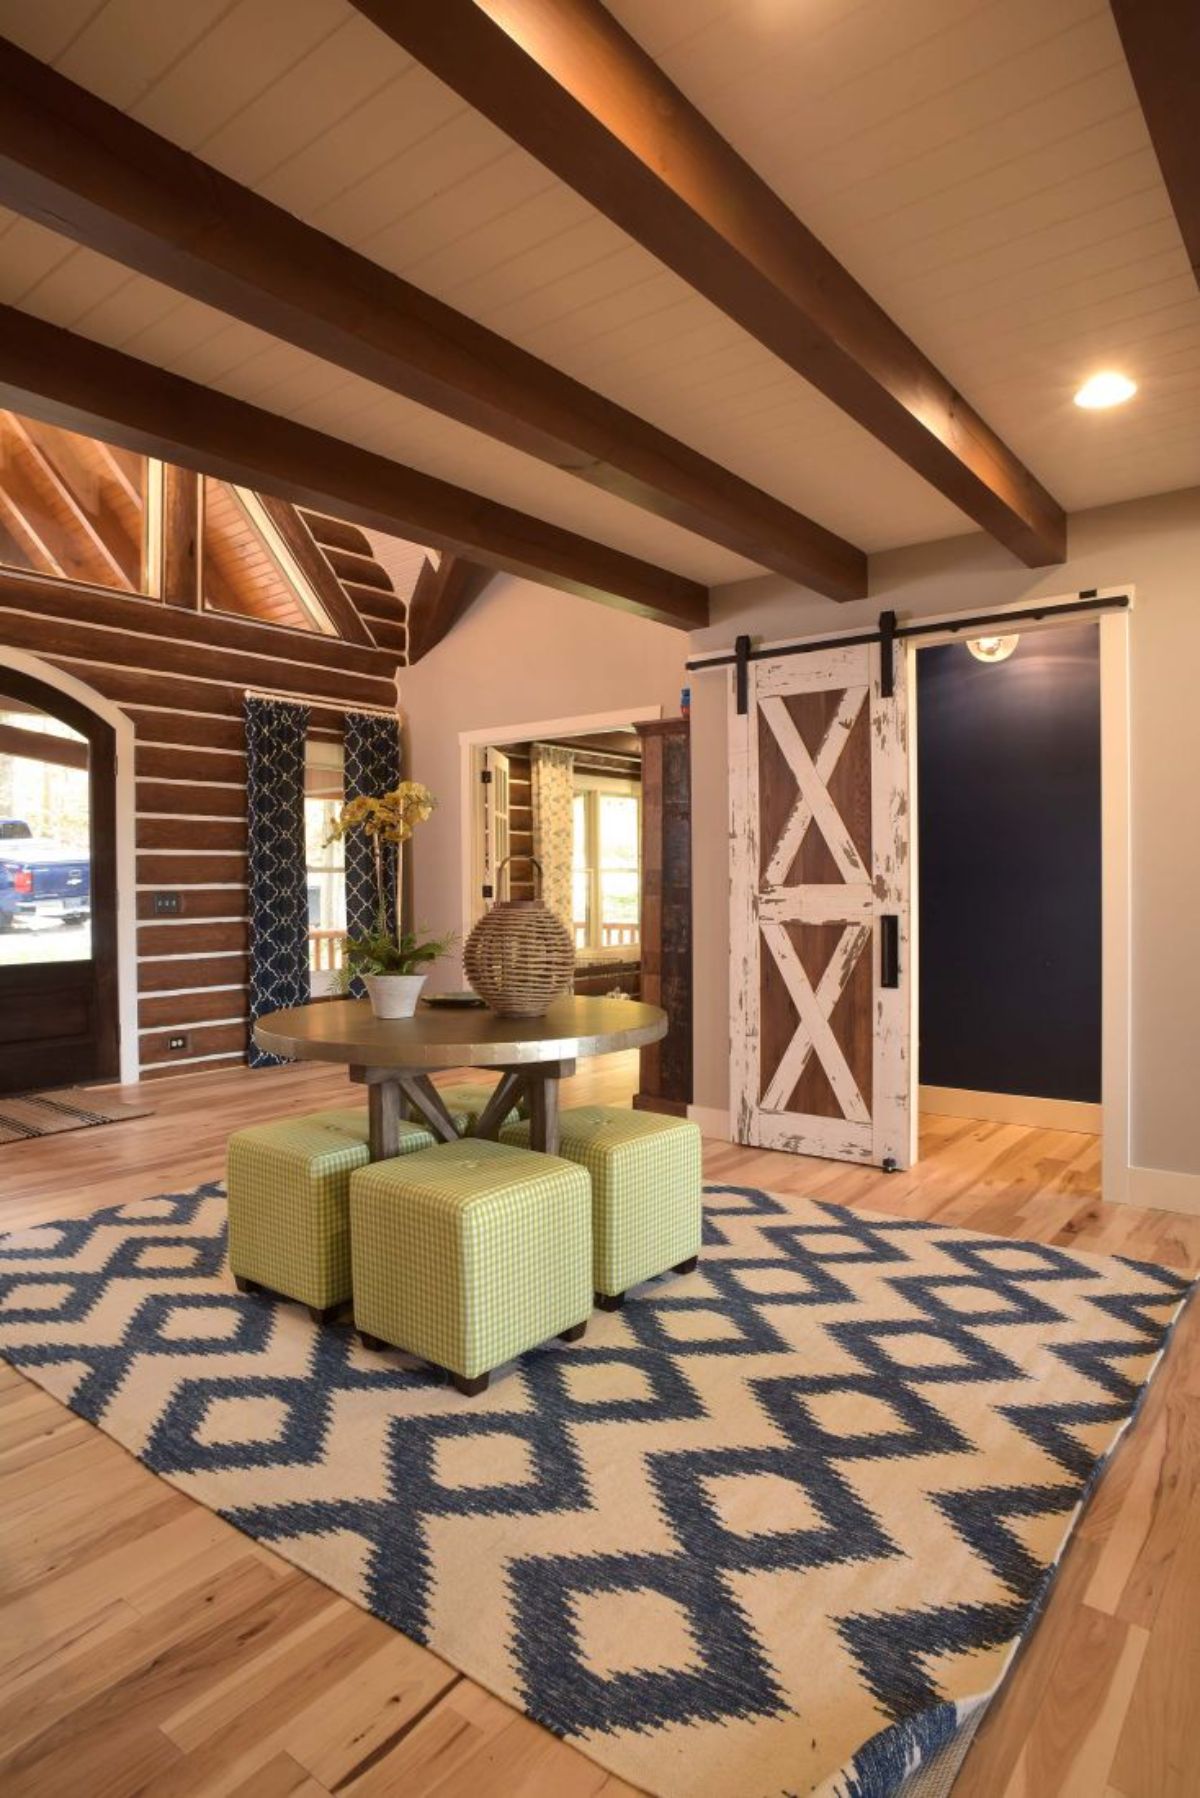 light green cubes on geometric pattern rug by door